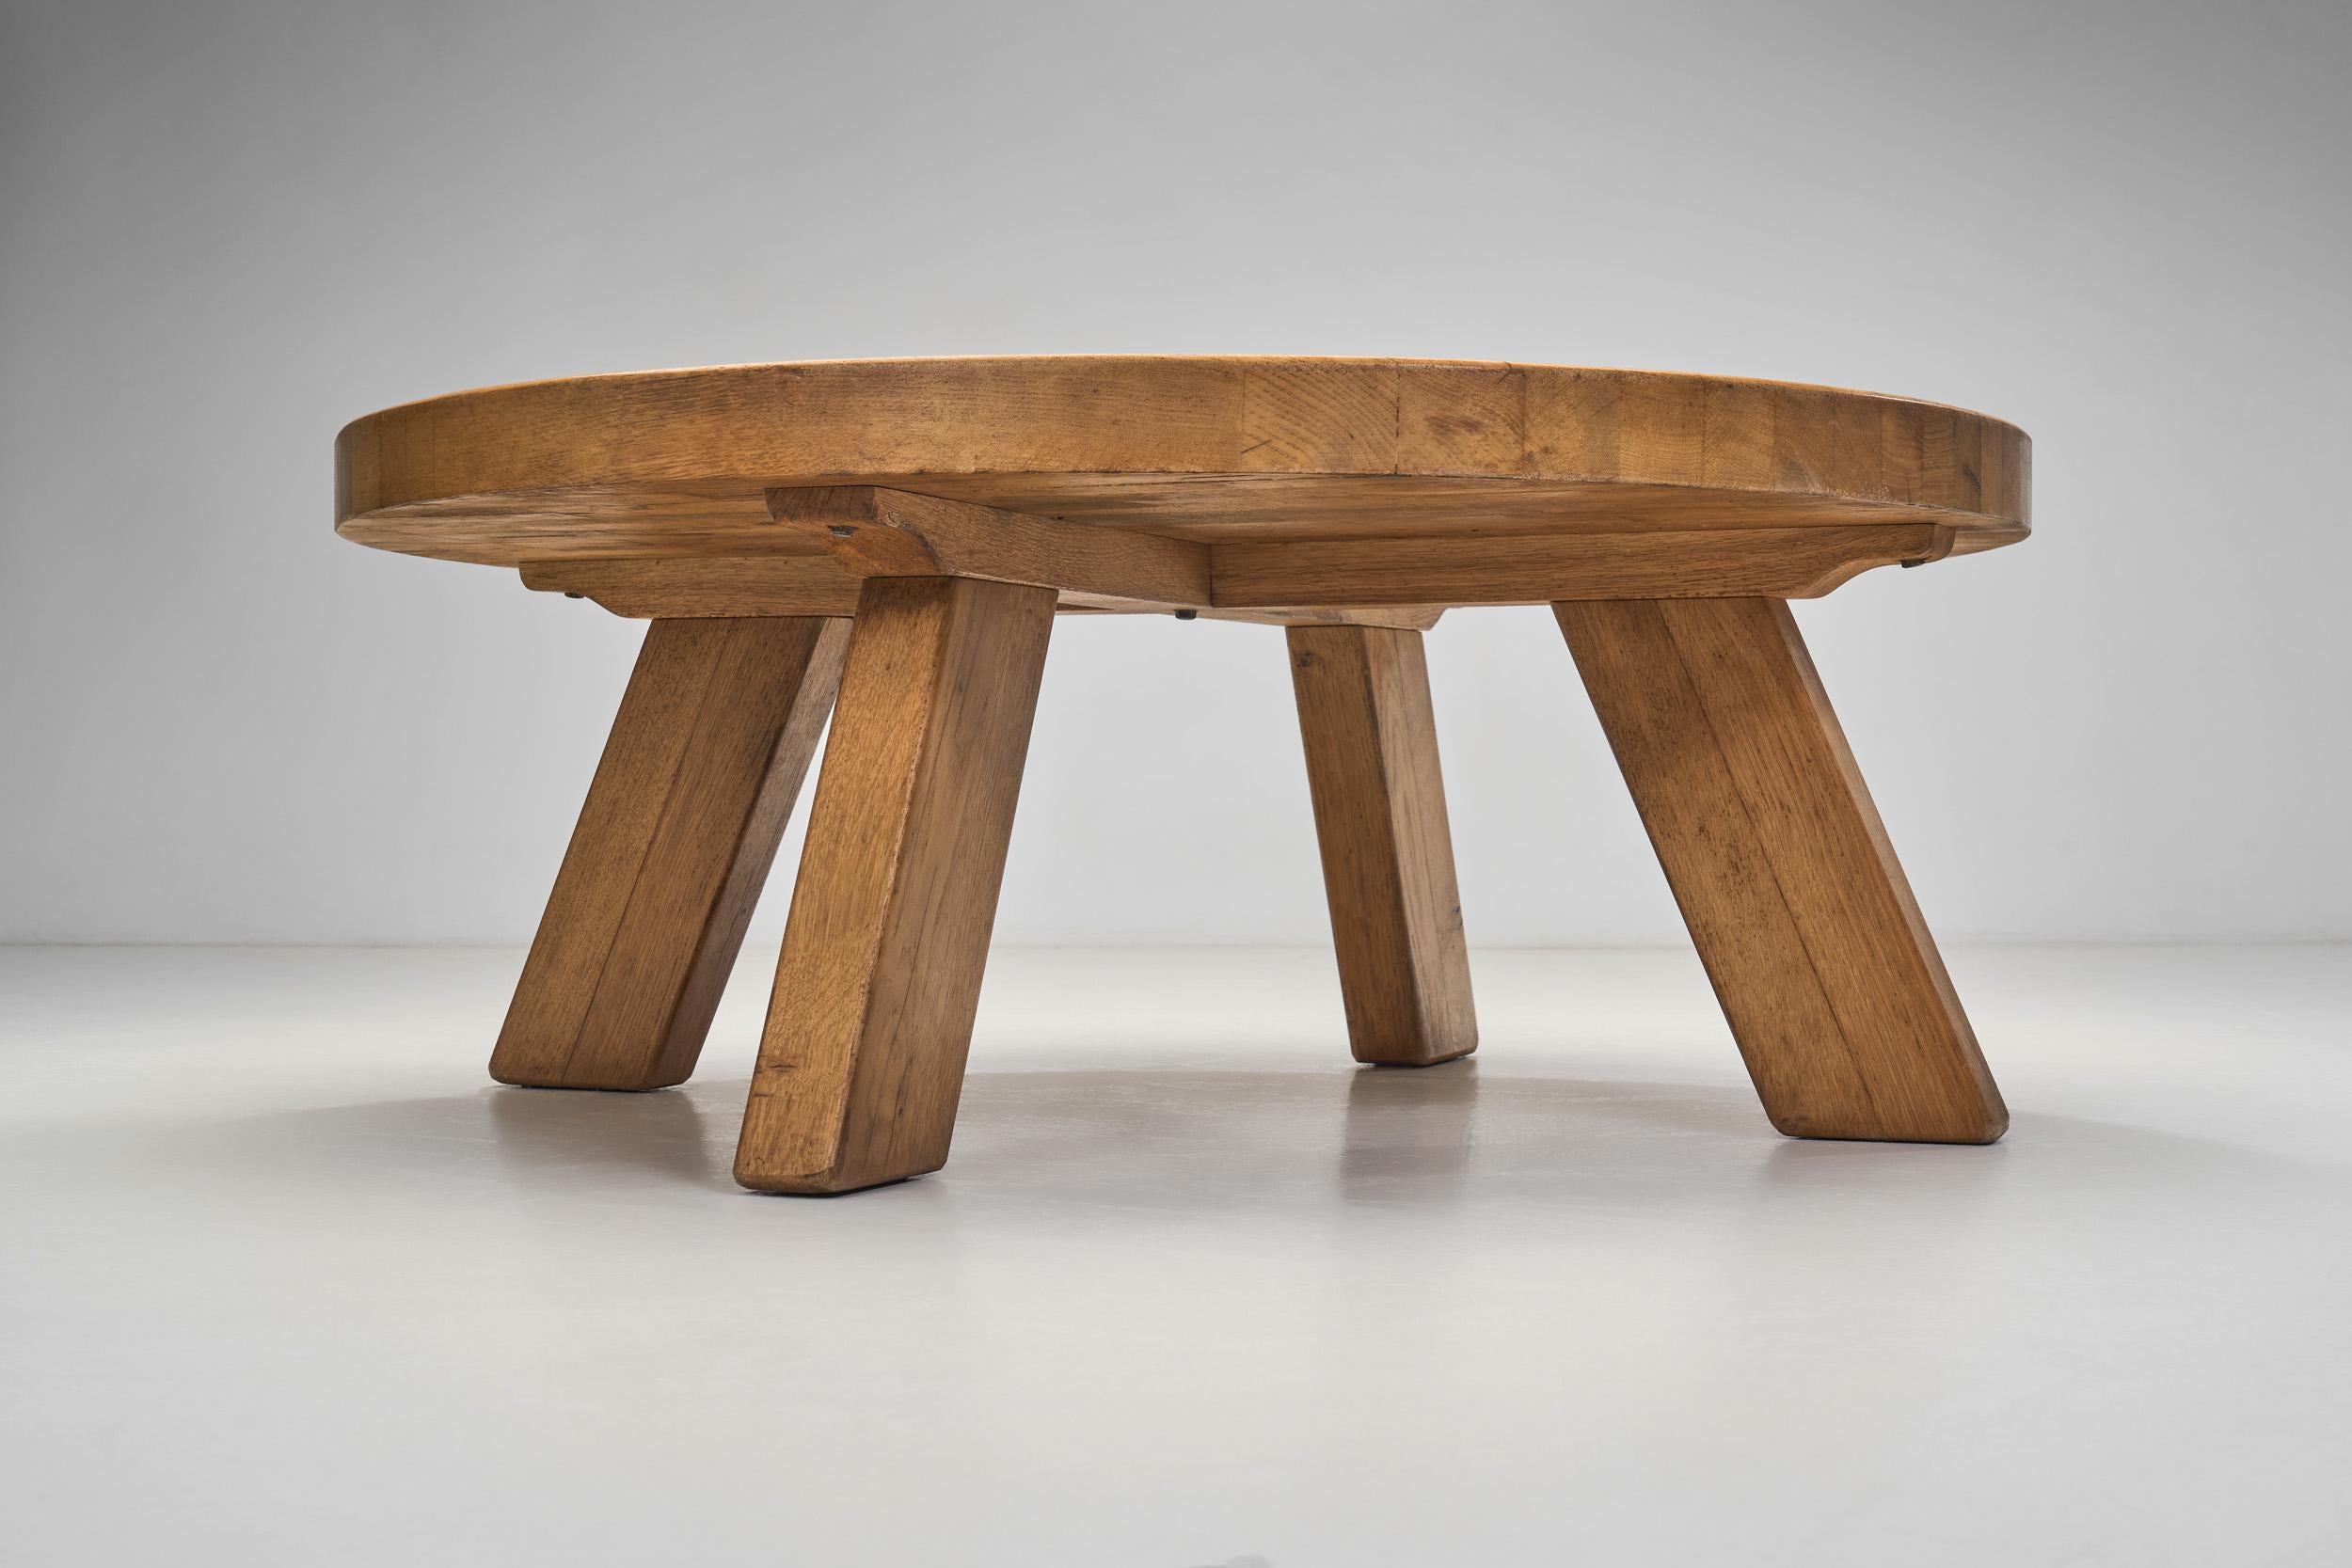 Solid Oak Round Brutalist Coffee Table, The Netherlands 1970s For Sale 6